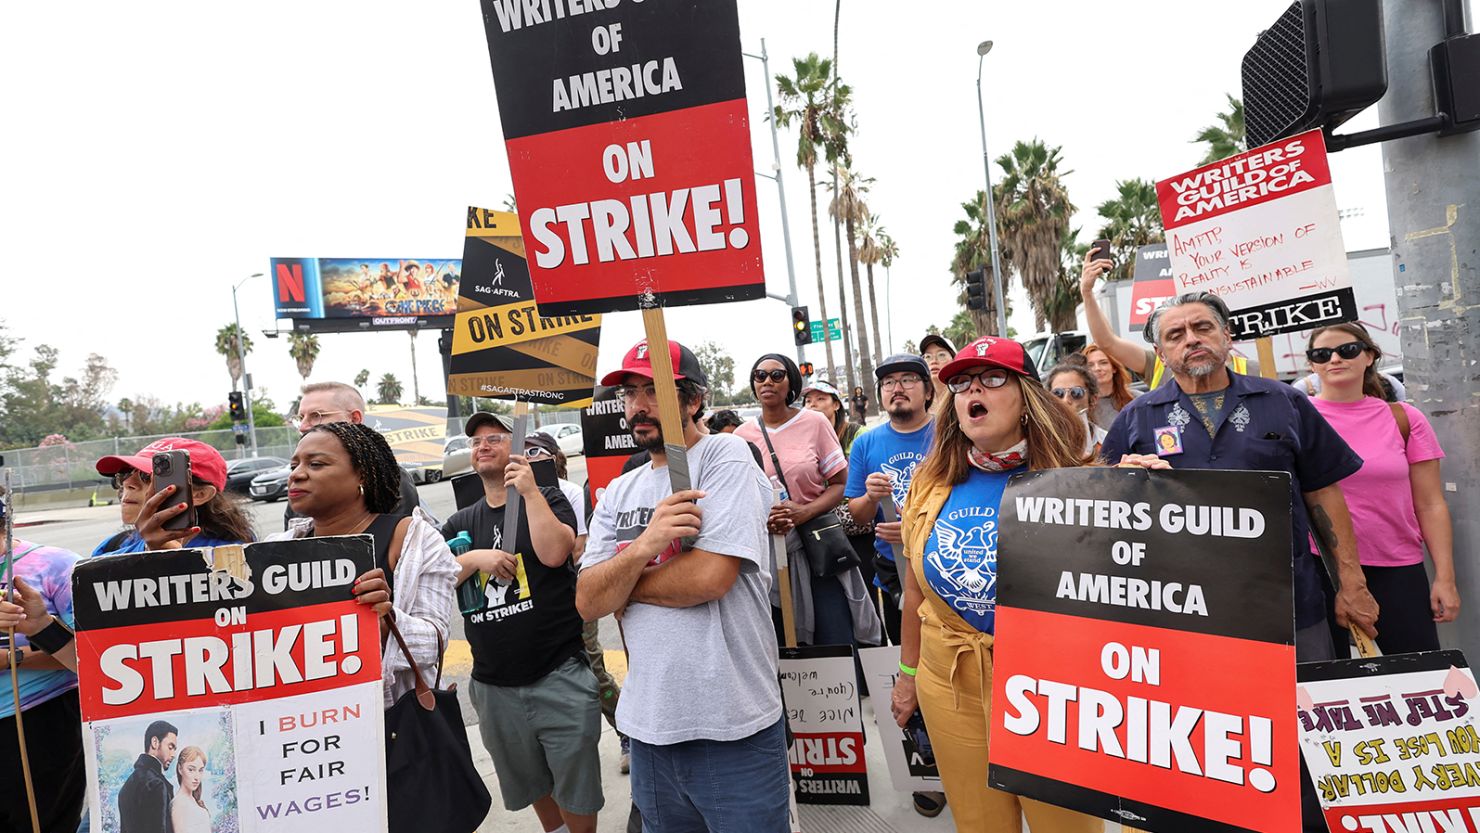 SAG-AFTRA actors and Writers Guild of America writers walk the picket line.